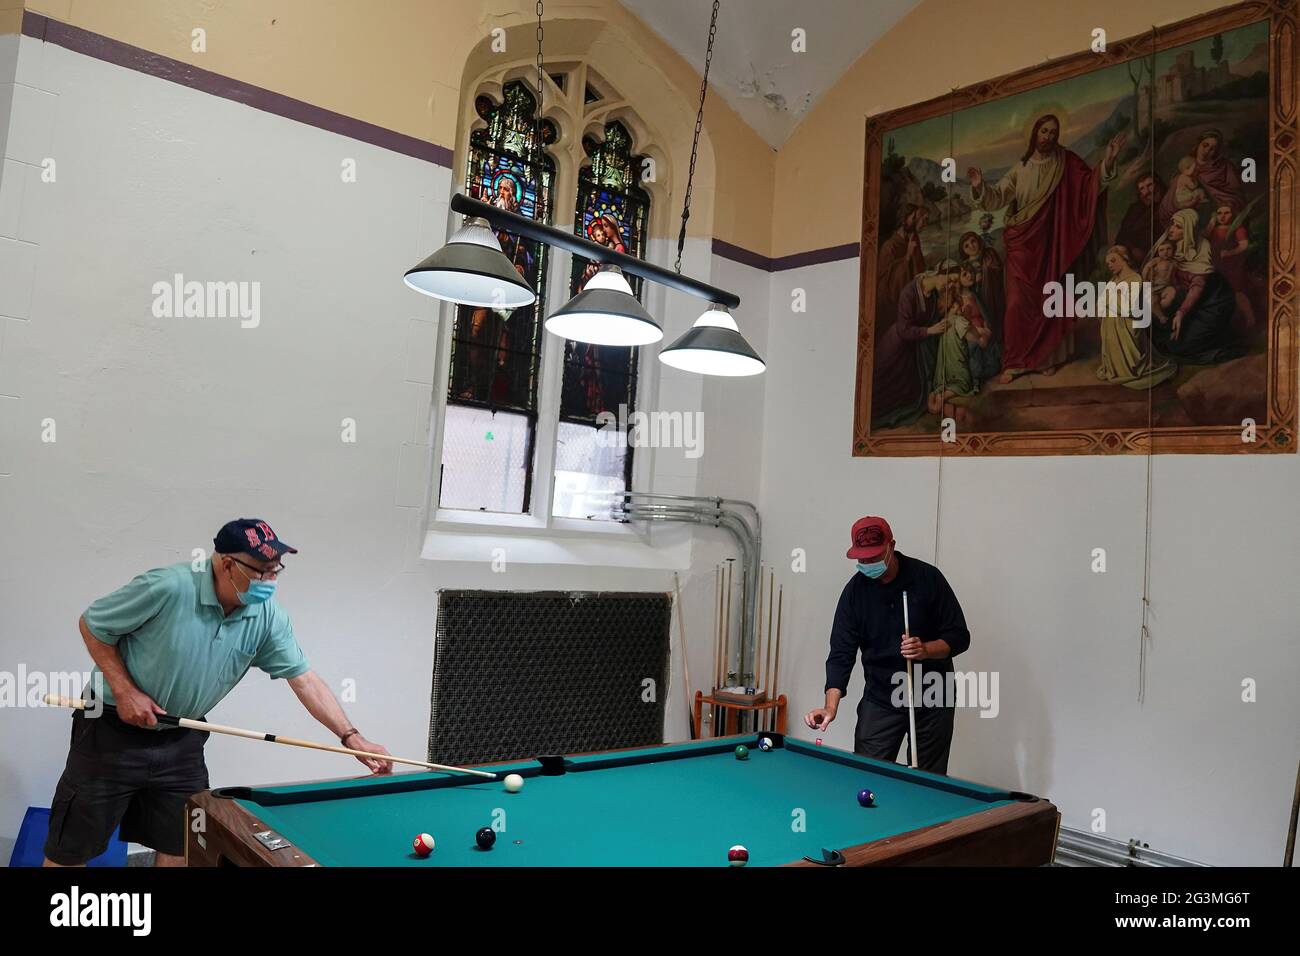 Billiards Picture High Resolution Stock Photography and Images - Alamy